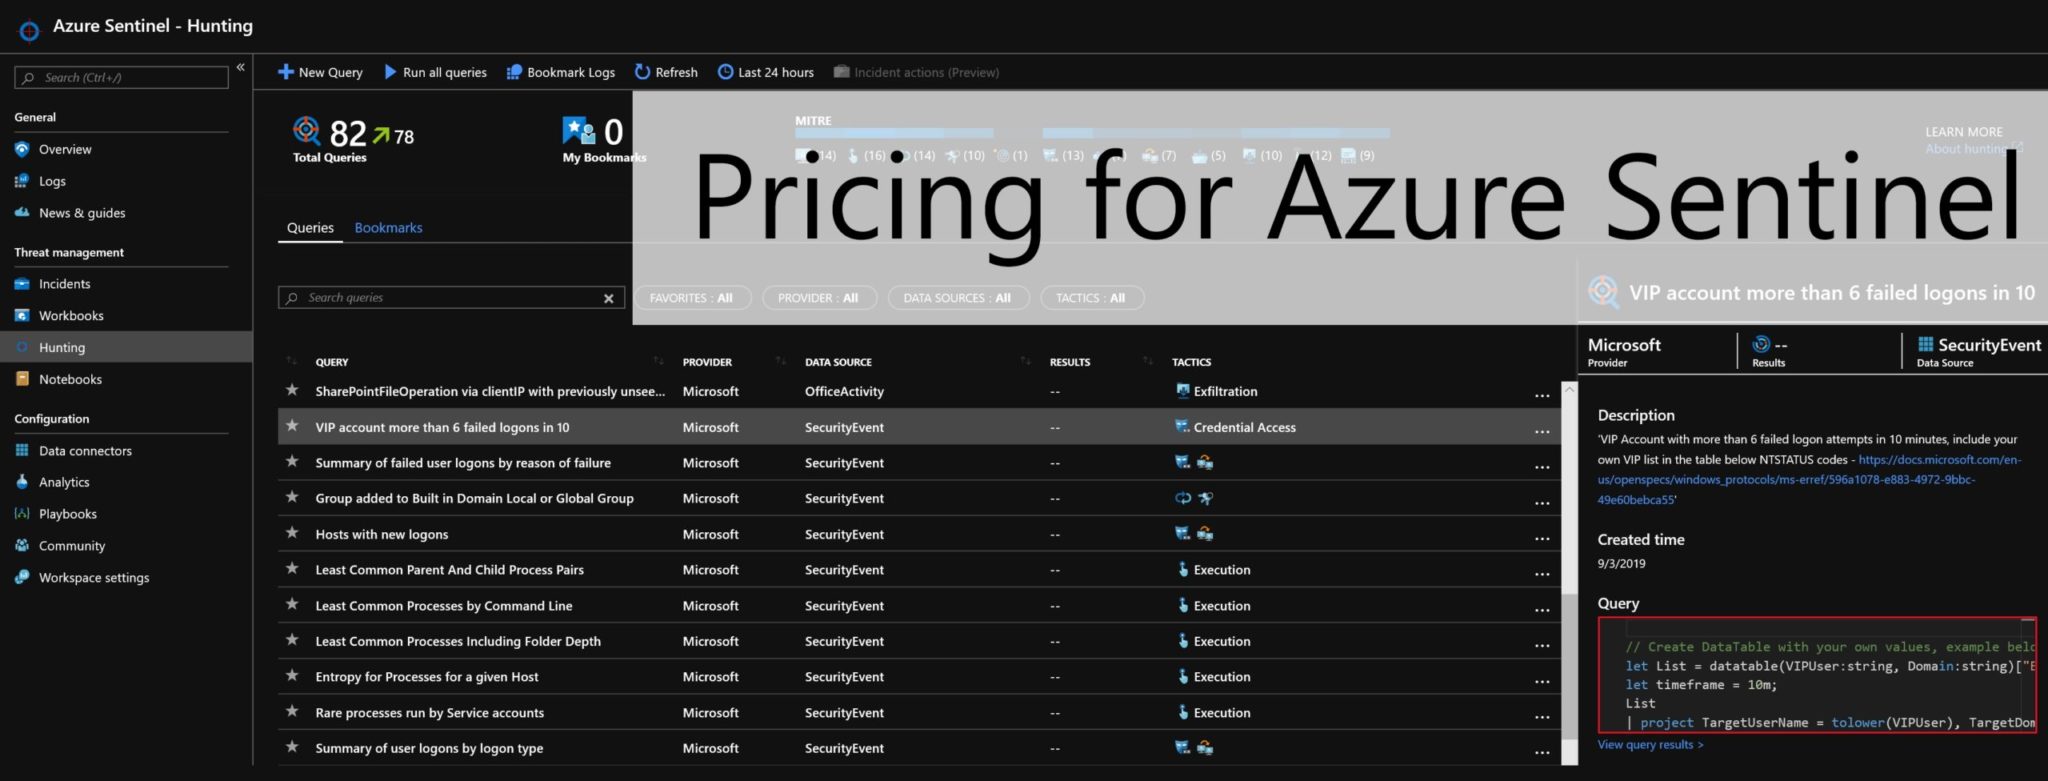 Pricing for Azure Sentinel is GA 8